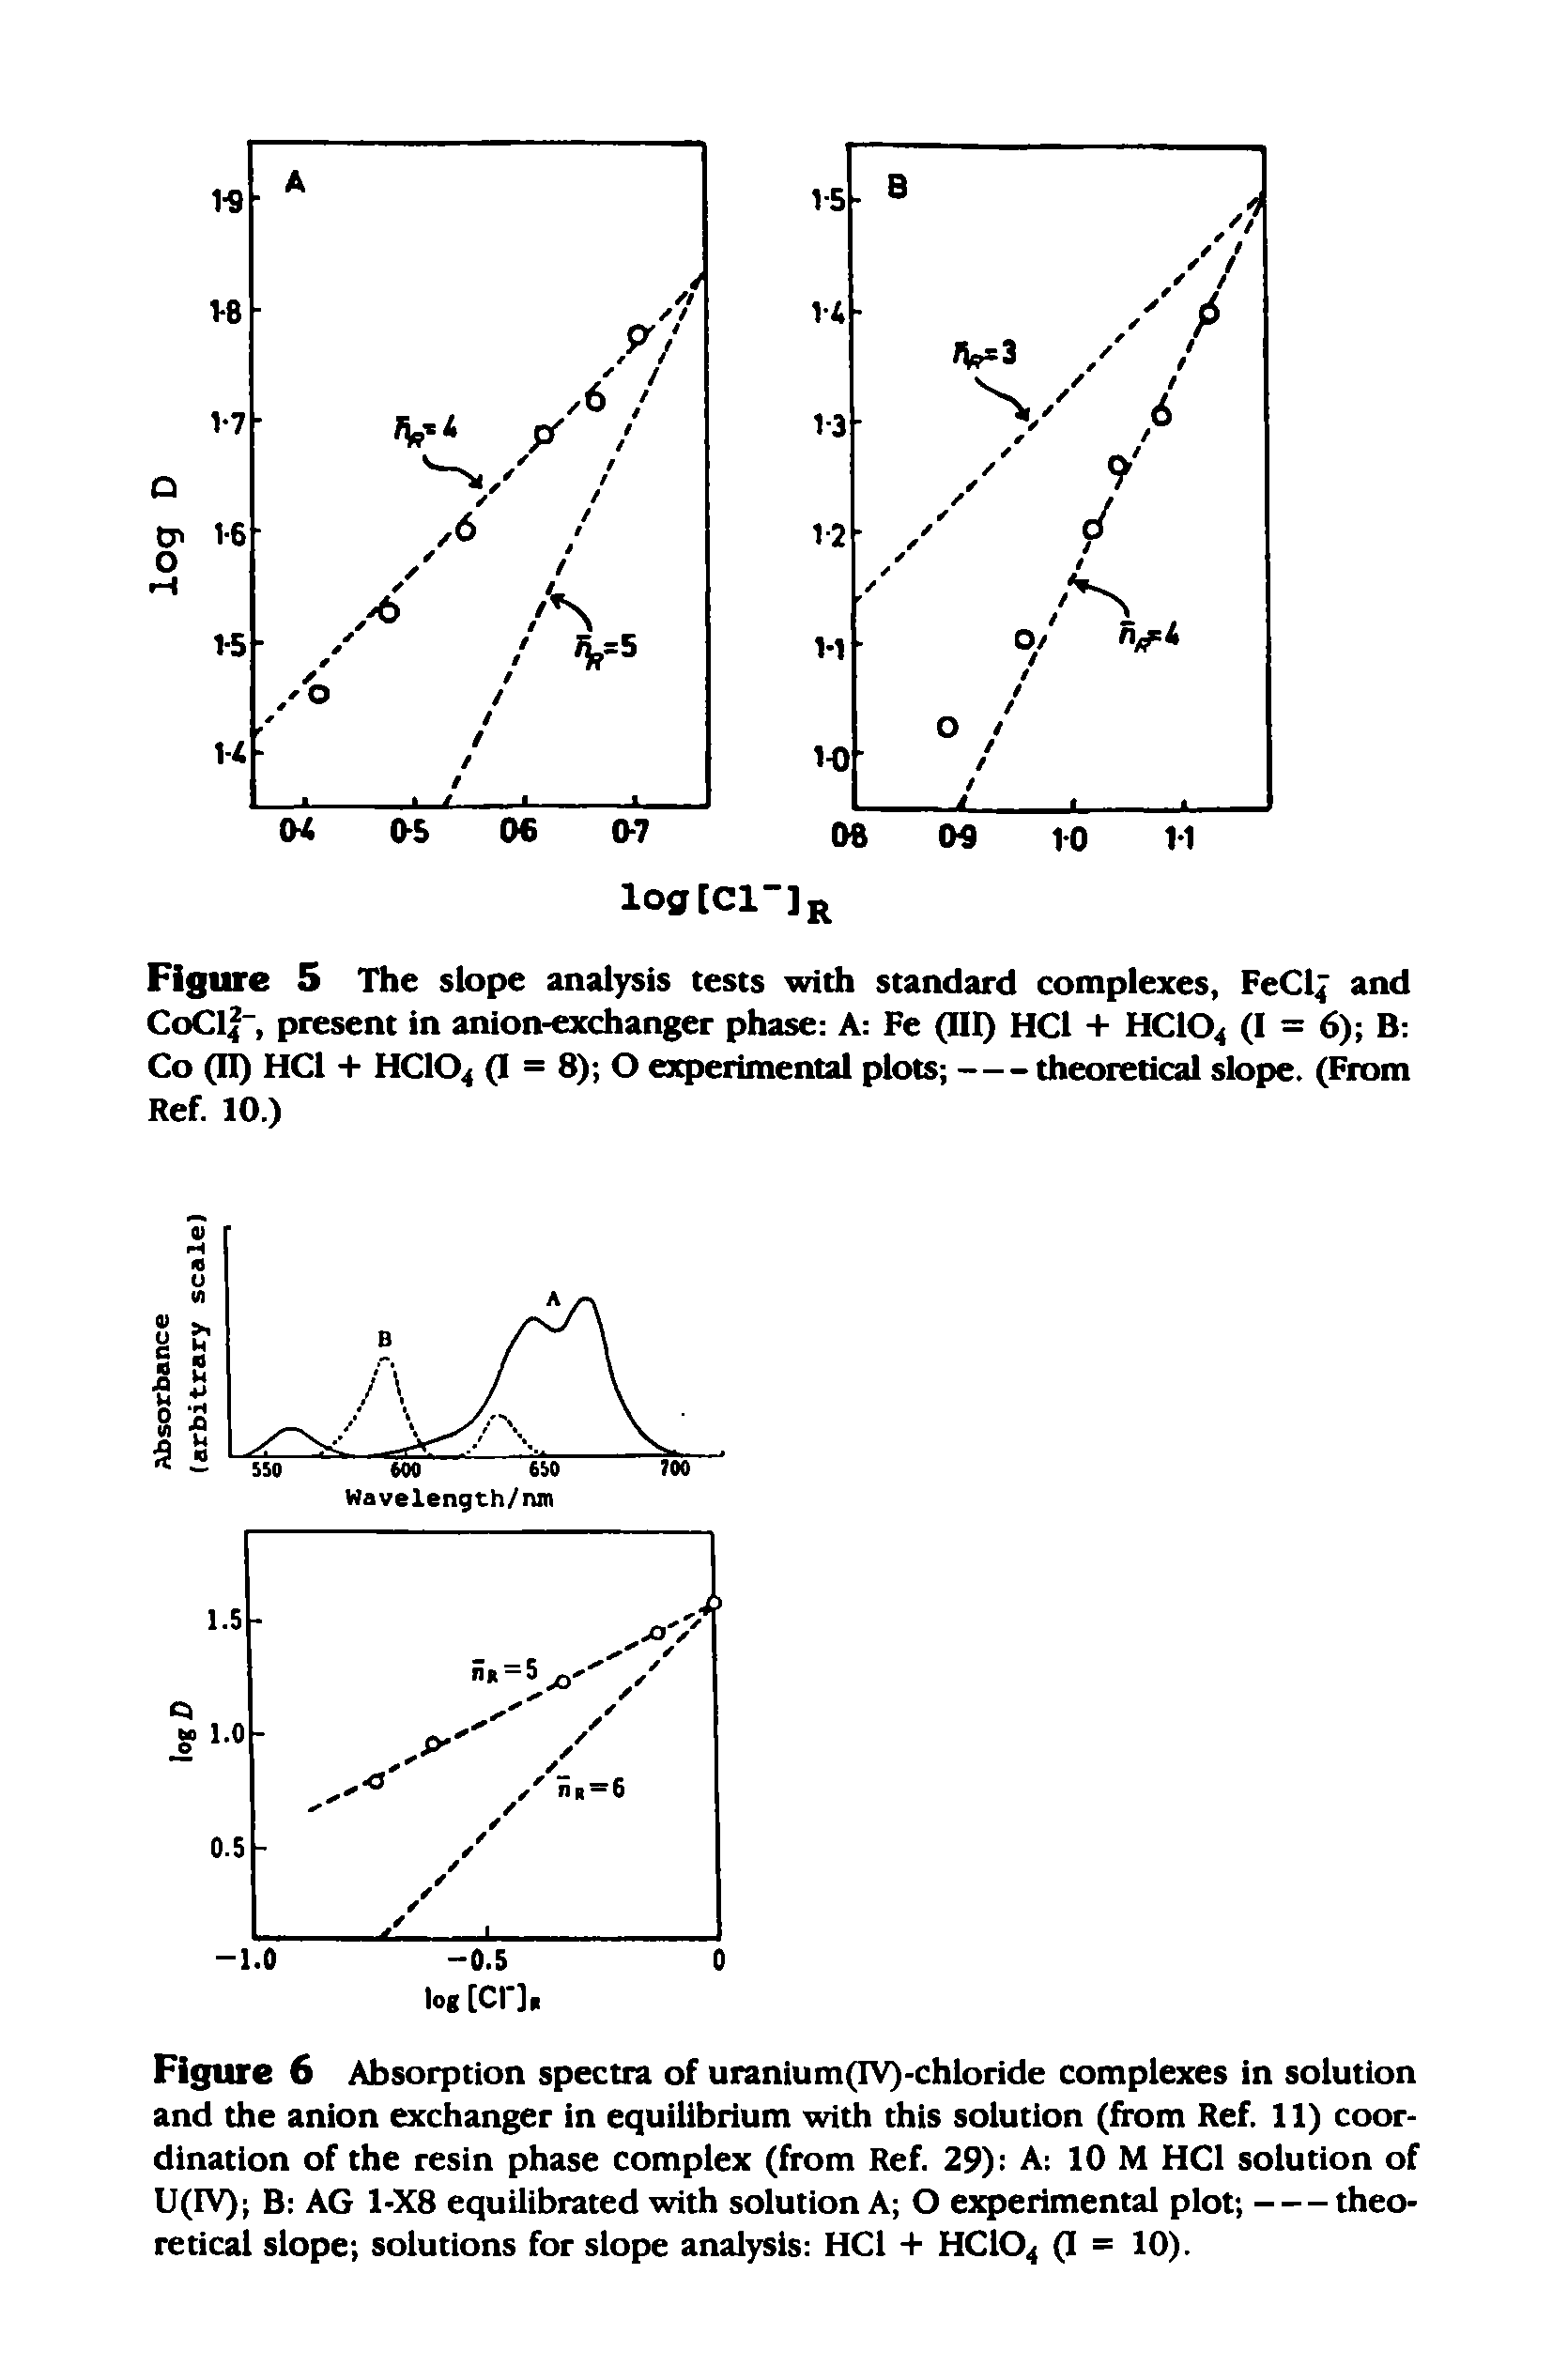 Figure 6 Absorption spectra of uranium(IV)-chloride complexes in solution and the anion exchanger in equilibrium with this solution (from Ref 11) coordination of the resin phase complex (from Ref 29) A 10 M HCl solution of U(IV) B AG 1-X8 equilibrated with solution A O experimental plot -------theo-...